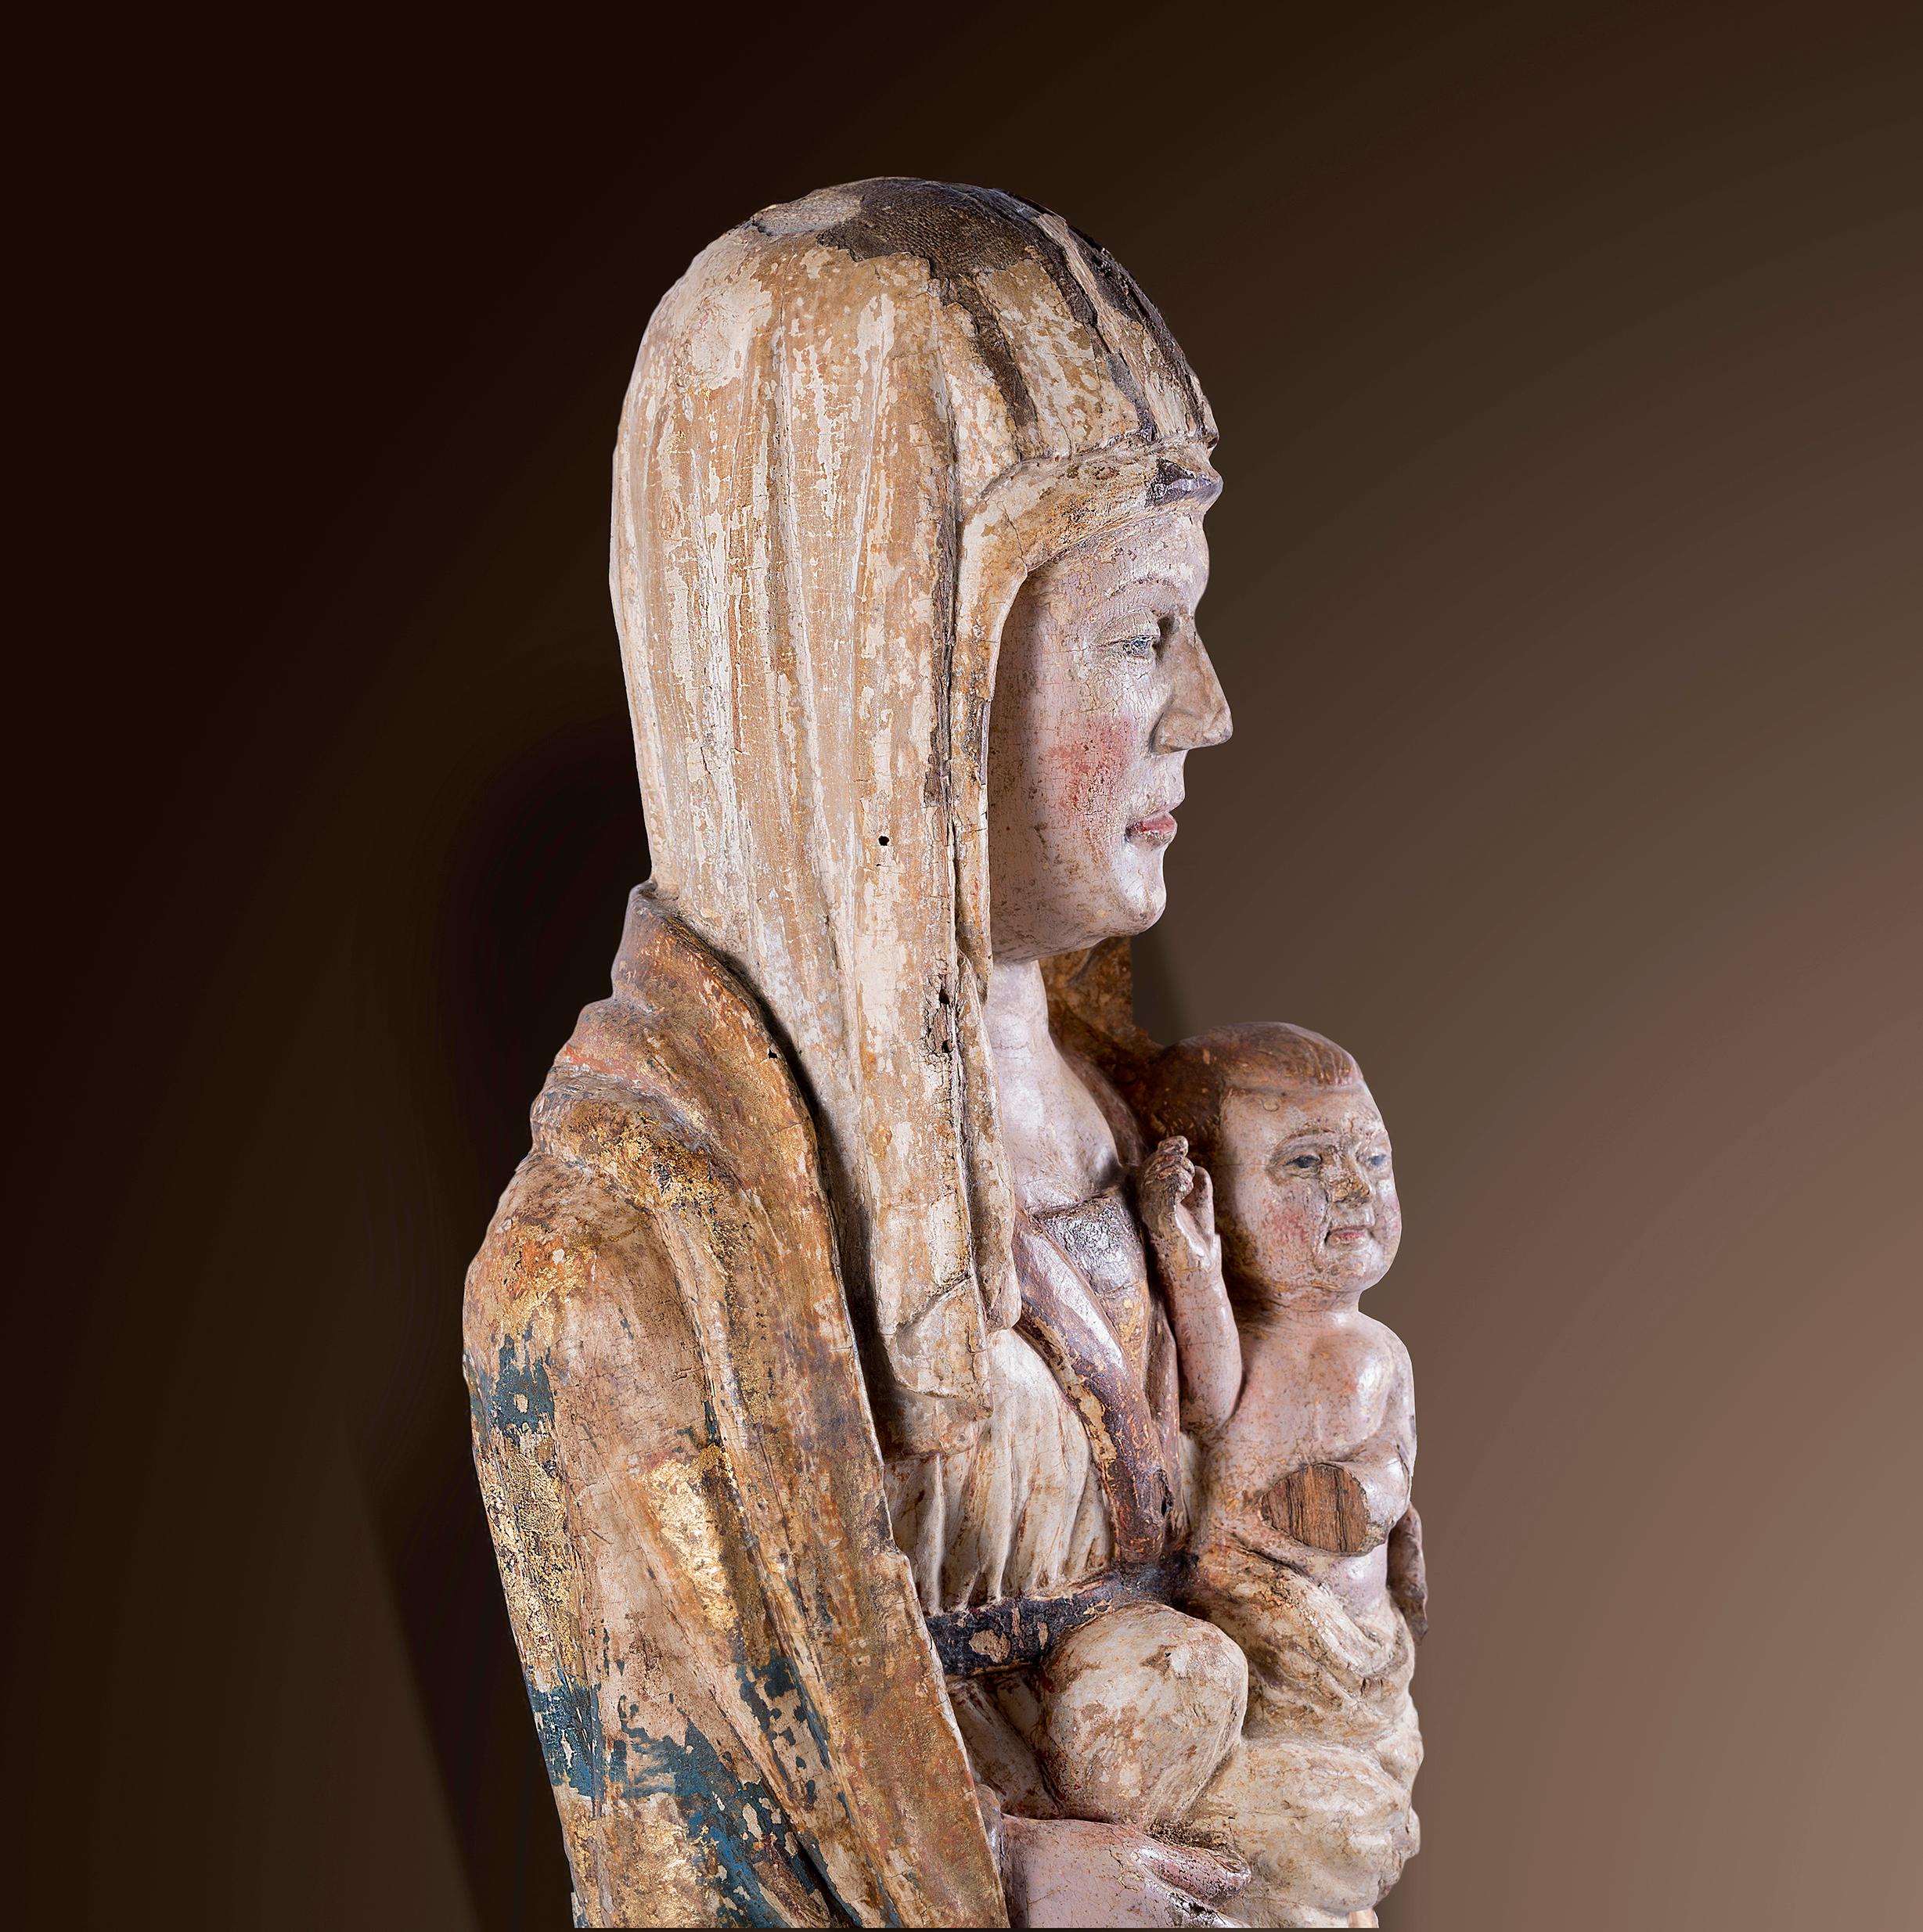 EXTREMELY RARE MADONNA
Lake Constance area 
Around 1300 
Carved votive wood 
Original, polychrome version 
Height 59 cm 

Provenance: 
Swiss private collection 

This Madonna figure was created around 1300 in the Lake Constance region. It is carved